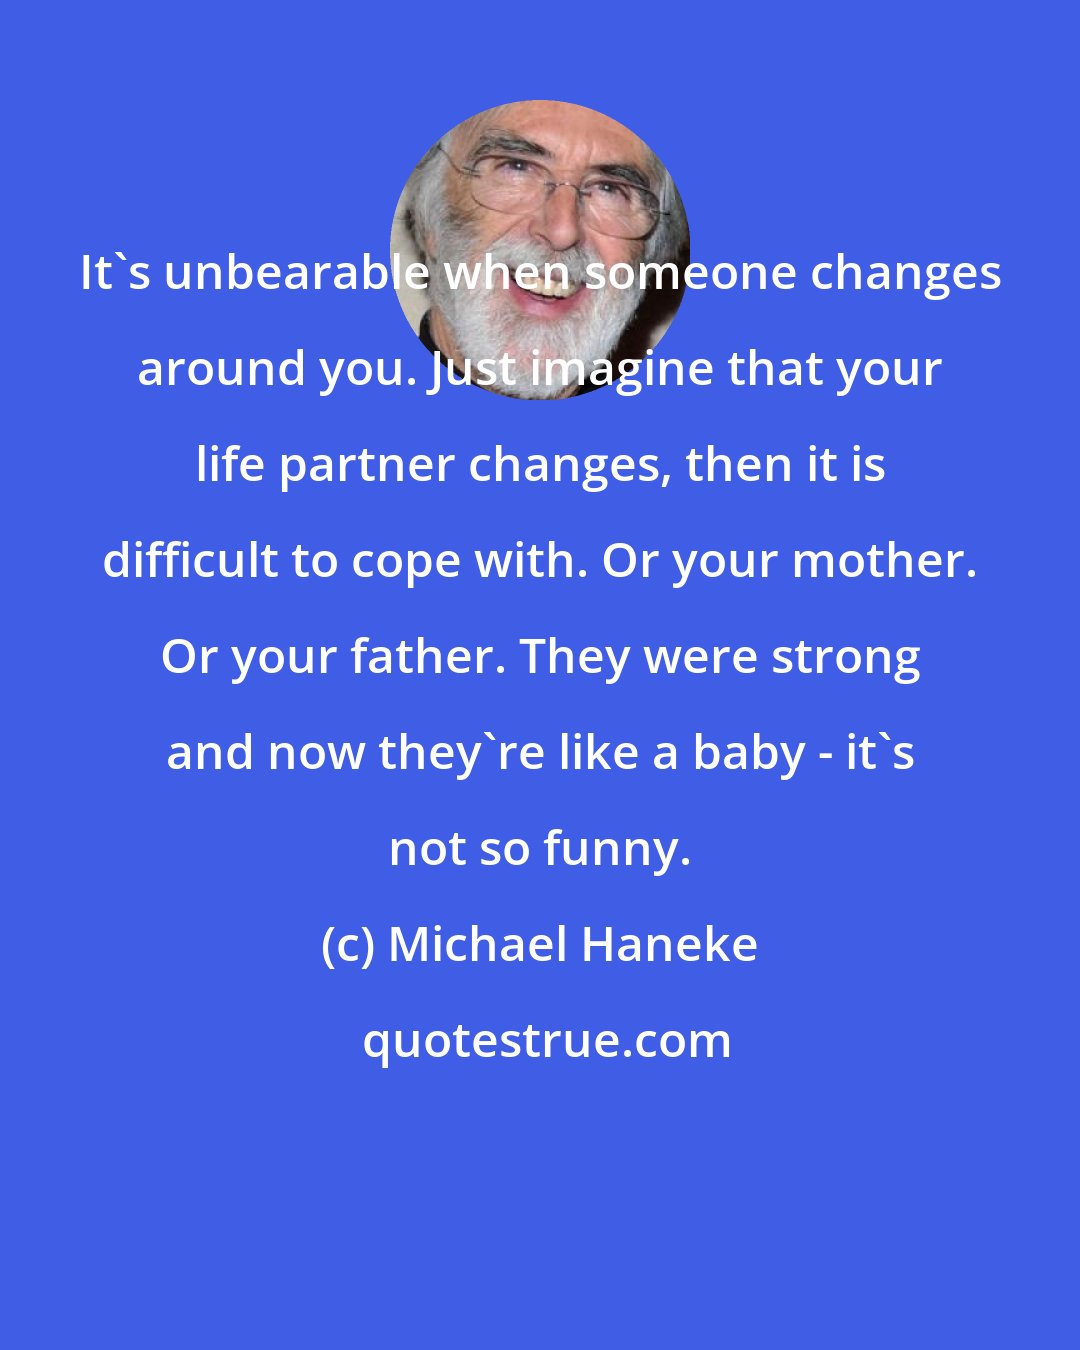 Michael Haneke: It's unbearable when someone changes around you. Just imagine that your life partner changes, then it is difficult to cope with. Or your mother. Or your father. They were strong and now they're like a baby - it's not so funny.